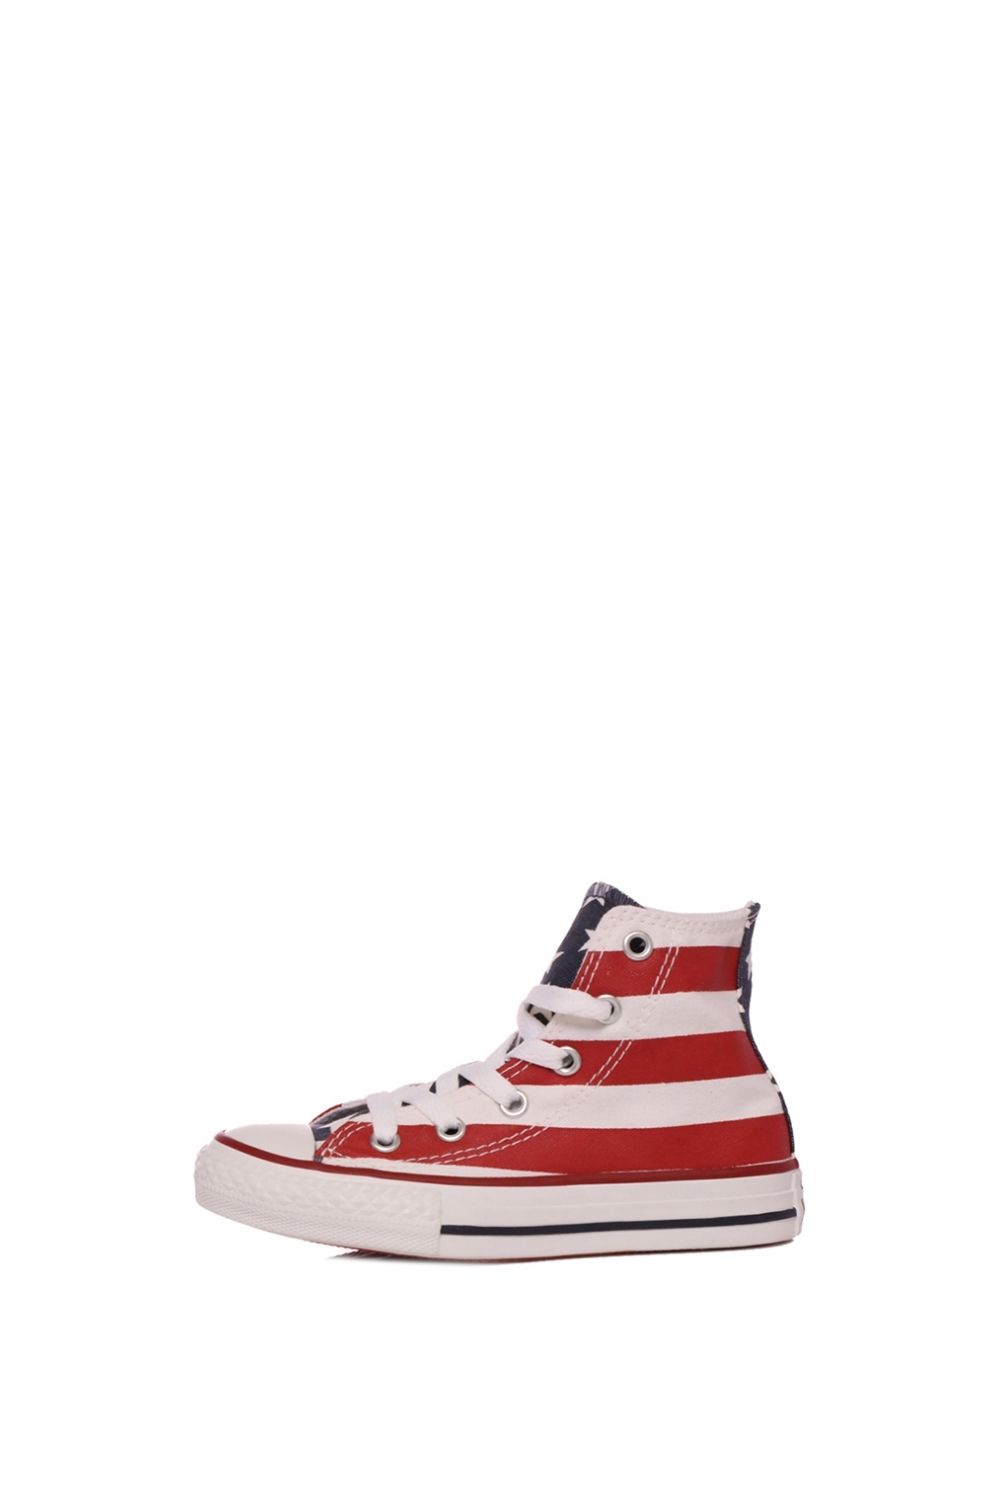 CONVERSE – Παιδικά ψηλά sneakers Chuck Taylor All Star Hi λευκά κόκκινα 1214142.0-1191